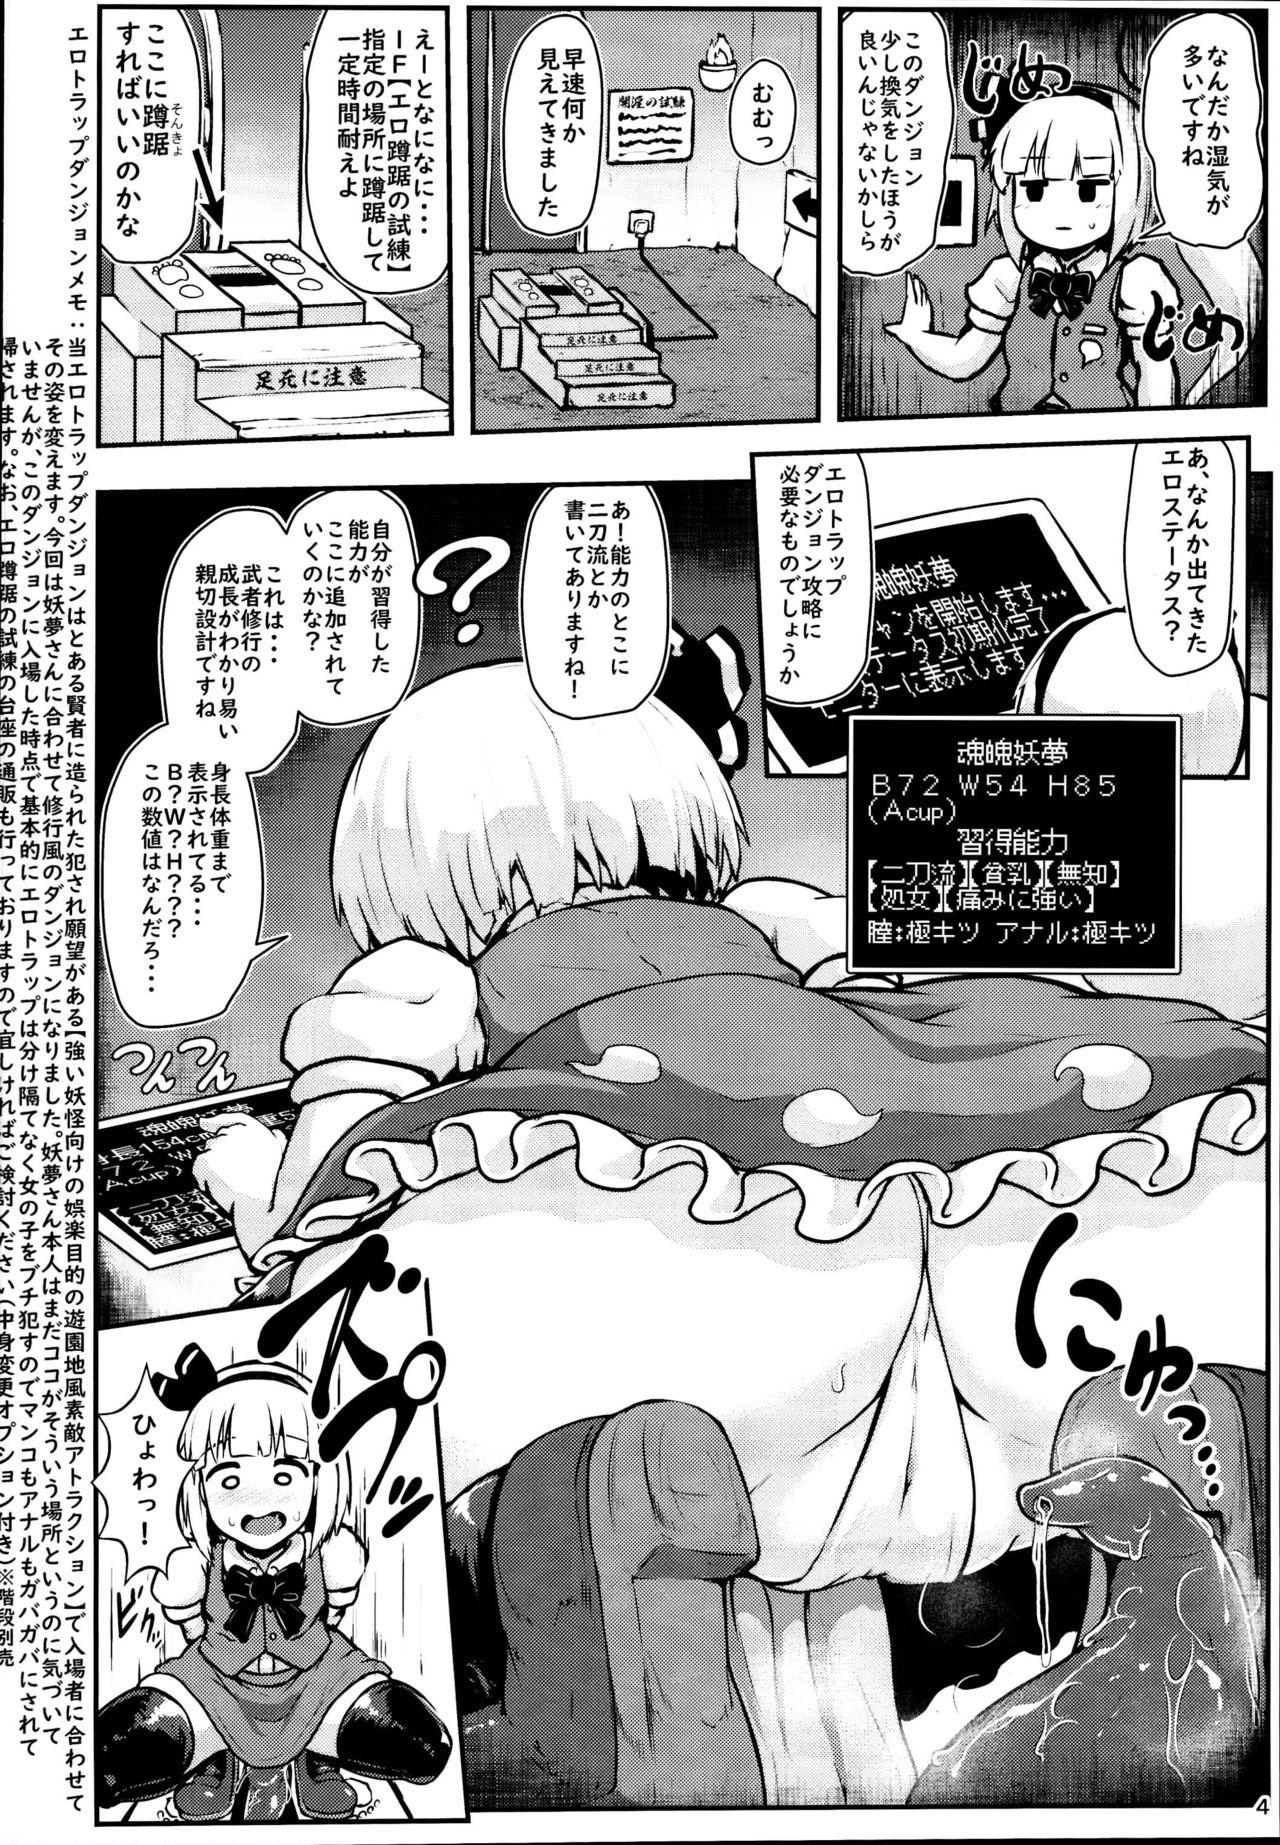 Stepmom Youmu in Ero Trap Dungeon - Touhou project Compilation - Page 4